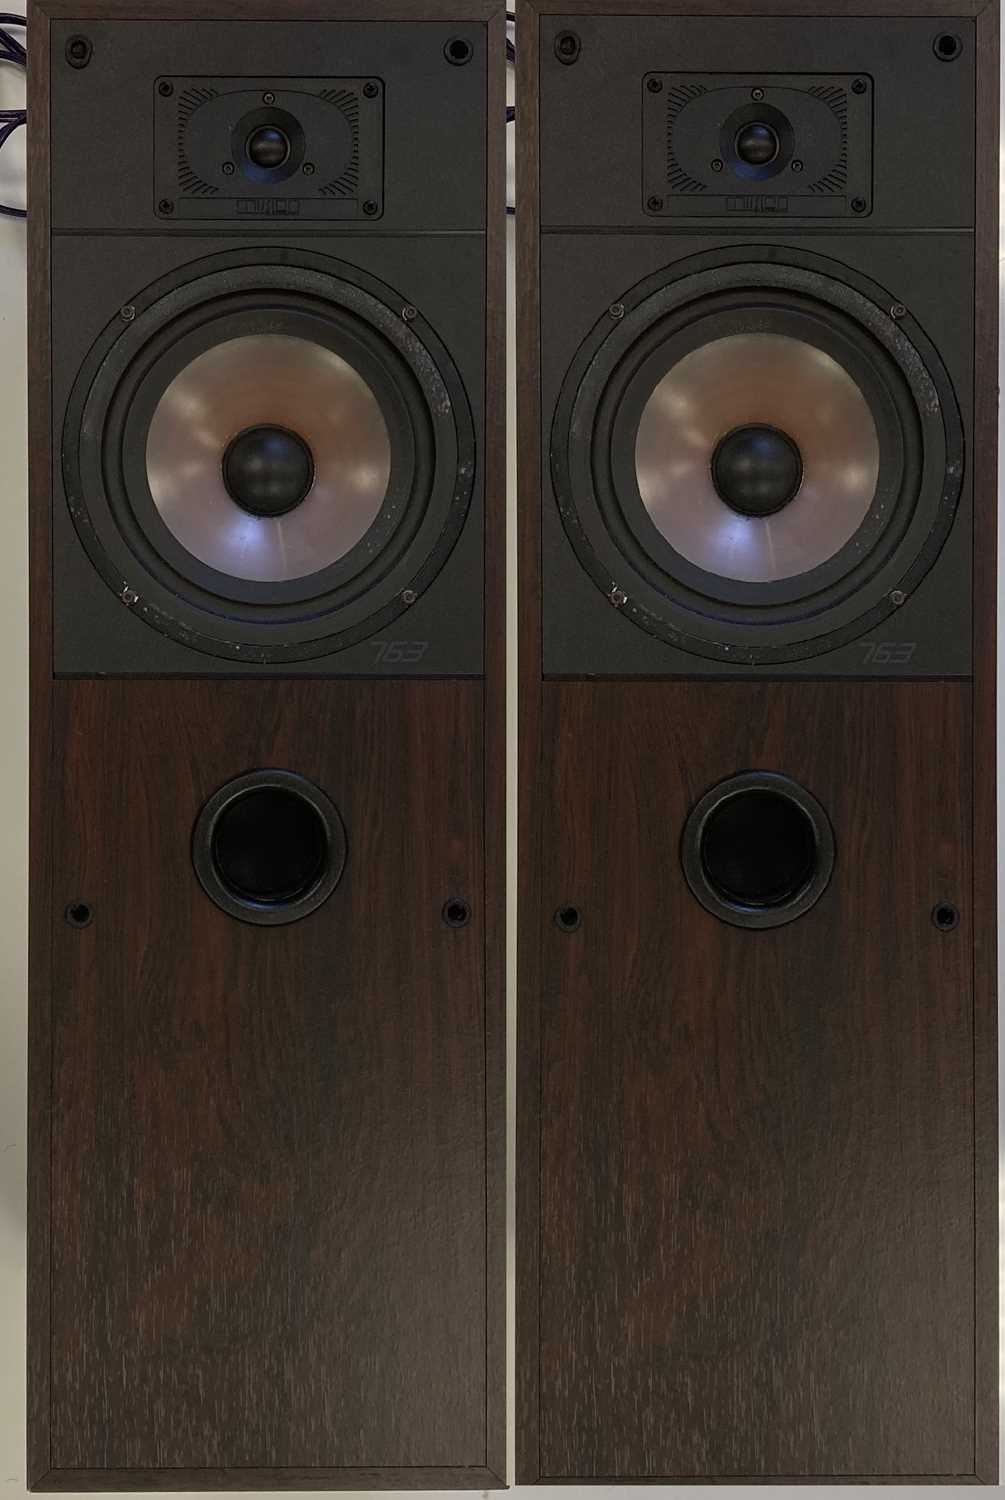 Lot 3 - PAIR OF MISSION 763 SPEAKERS IN ORIGINAL BOXES